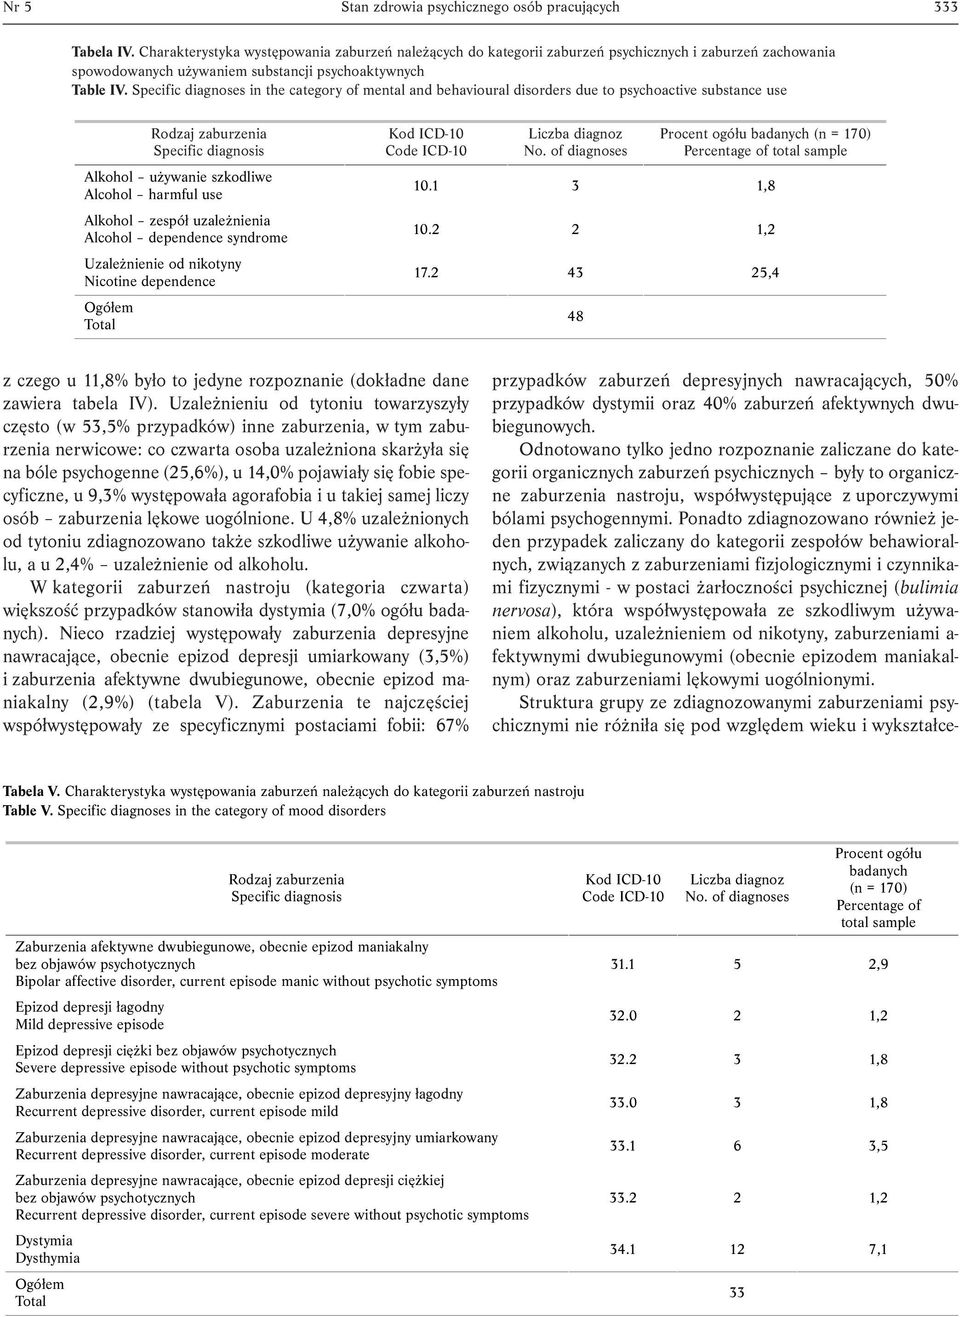 Specific diagnoses in the category of mental and behavioural disorders due to psychoactive substance use Rodzaj zaburzenia Specific diagnosis Alkohol używanie szkodliwe Alcohol harmful use Alkohol